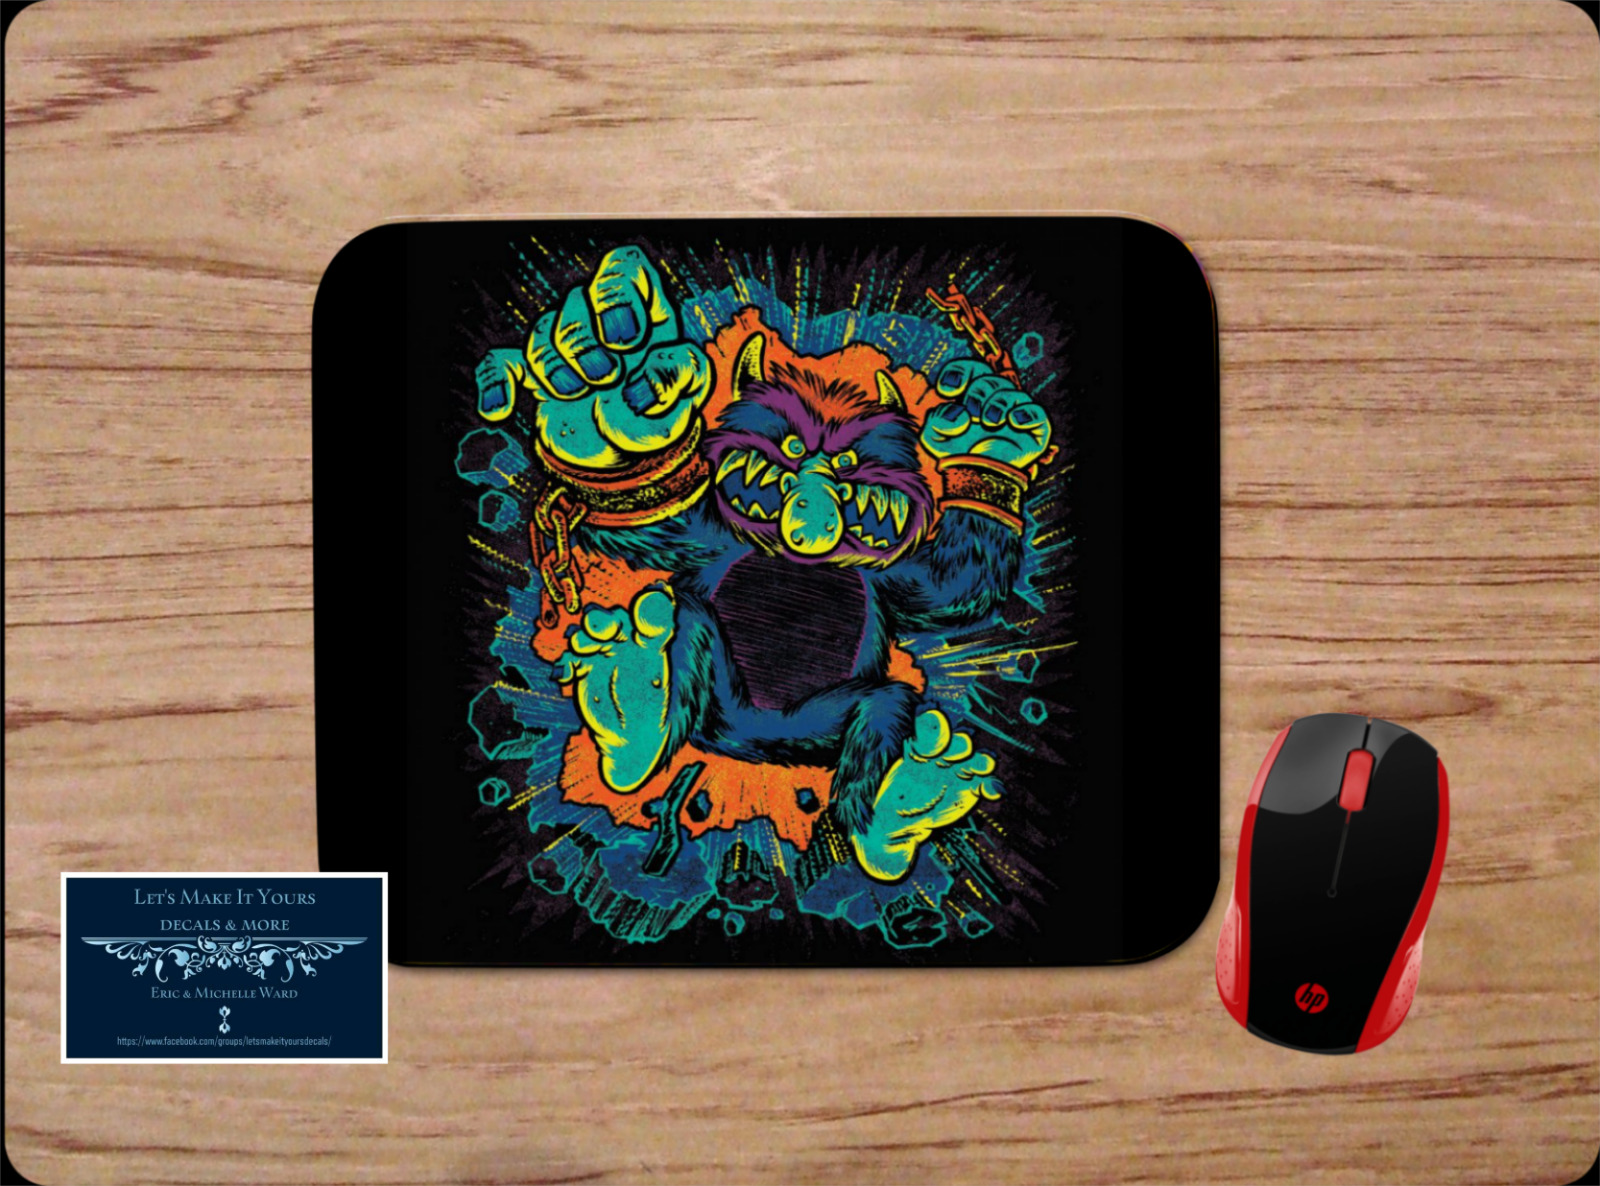 MY PET MONSTER 80s CLASSIC TOY INSPIRED ART CUSTOM DESK MAT MOUSE PAD PC GAMING